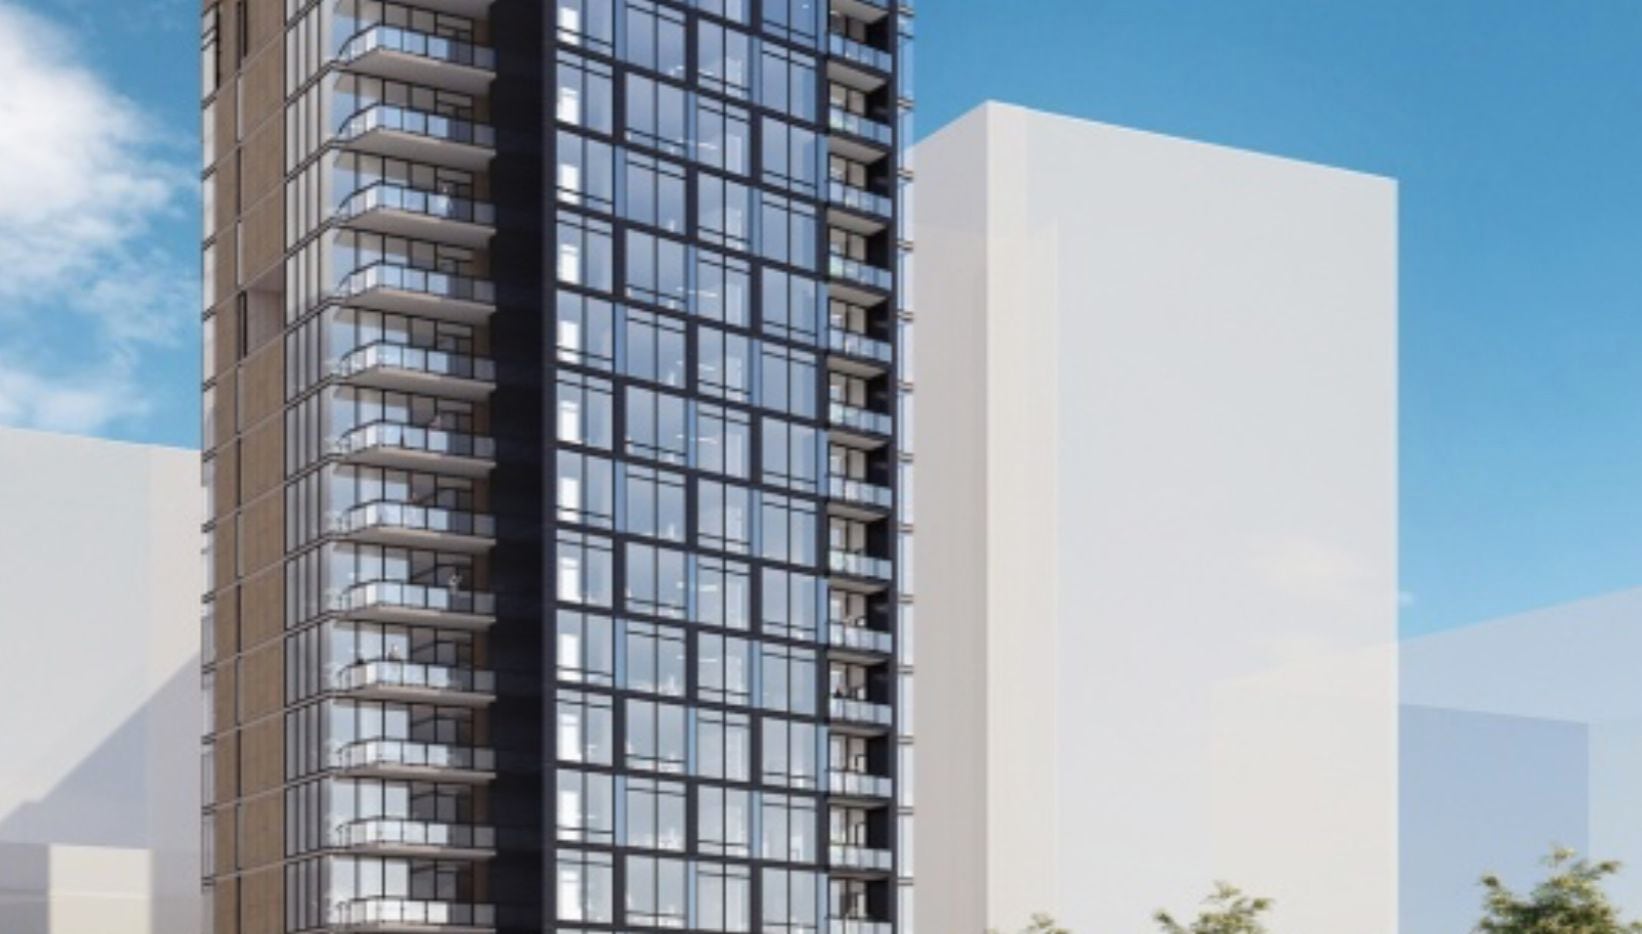 A high-rise development plan for the property that was included in JLL's marketing of the site.